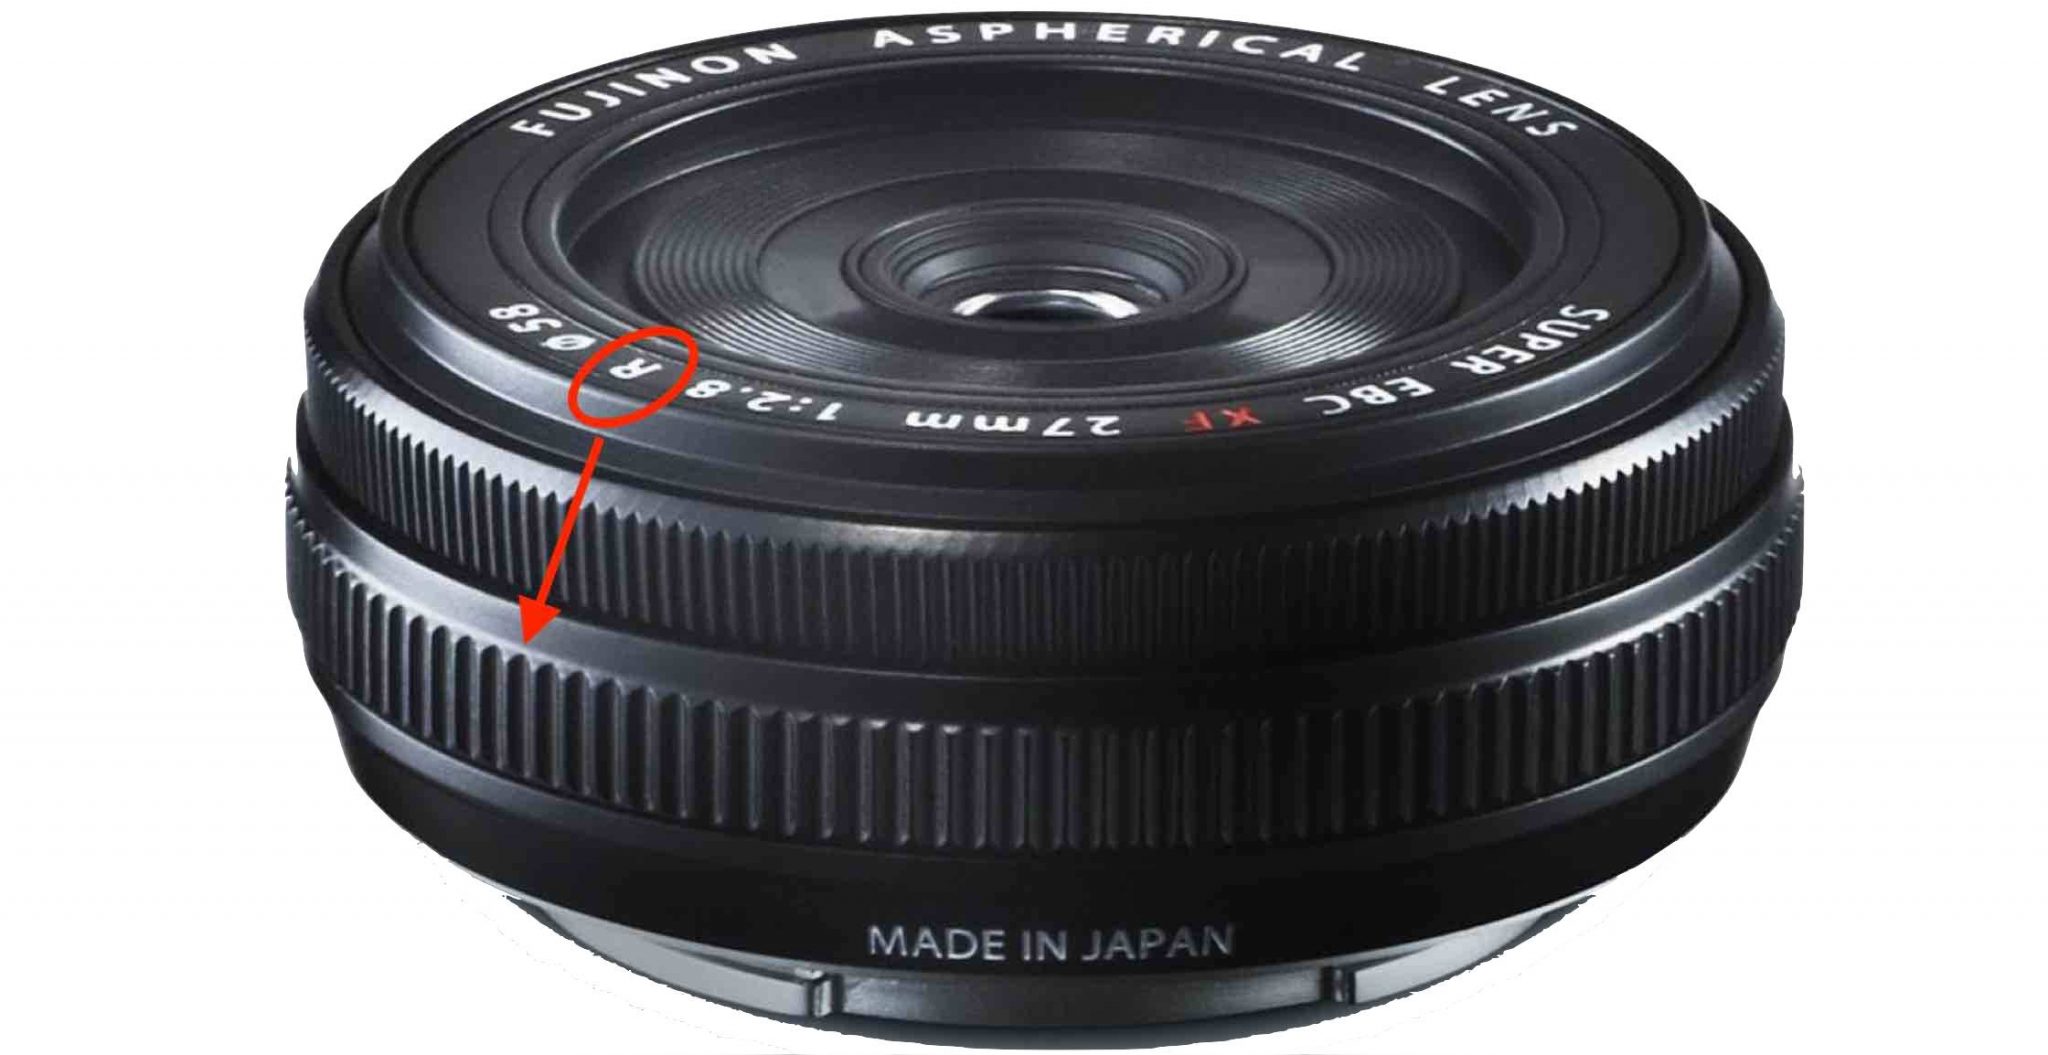 Fujinon XF 27mm f/2.8 R with Aperture Ring Listed at Some